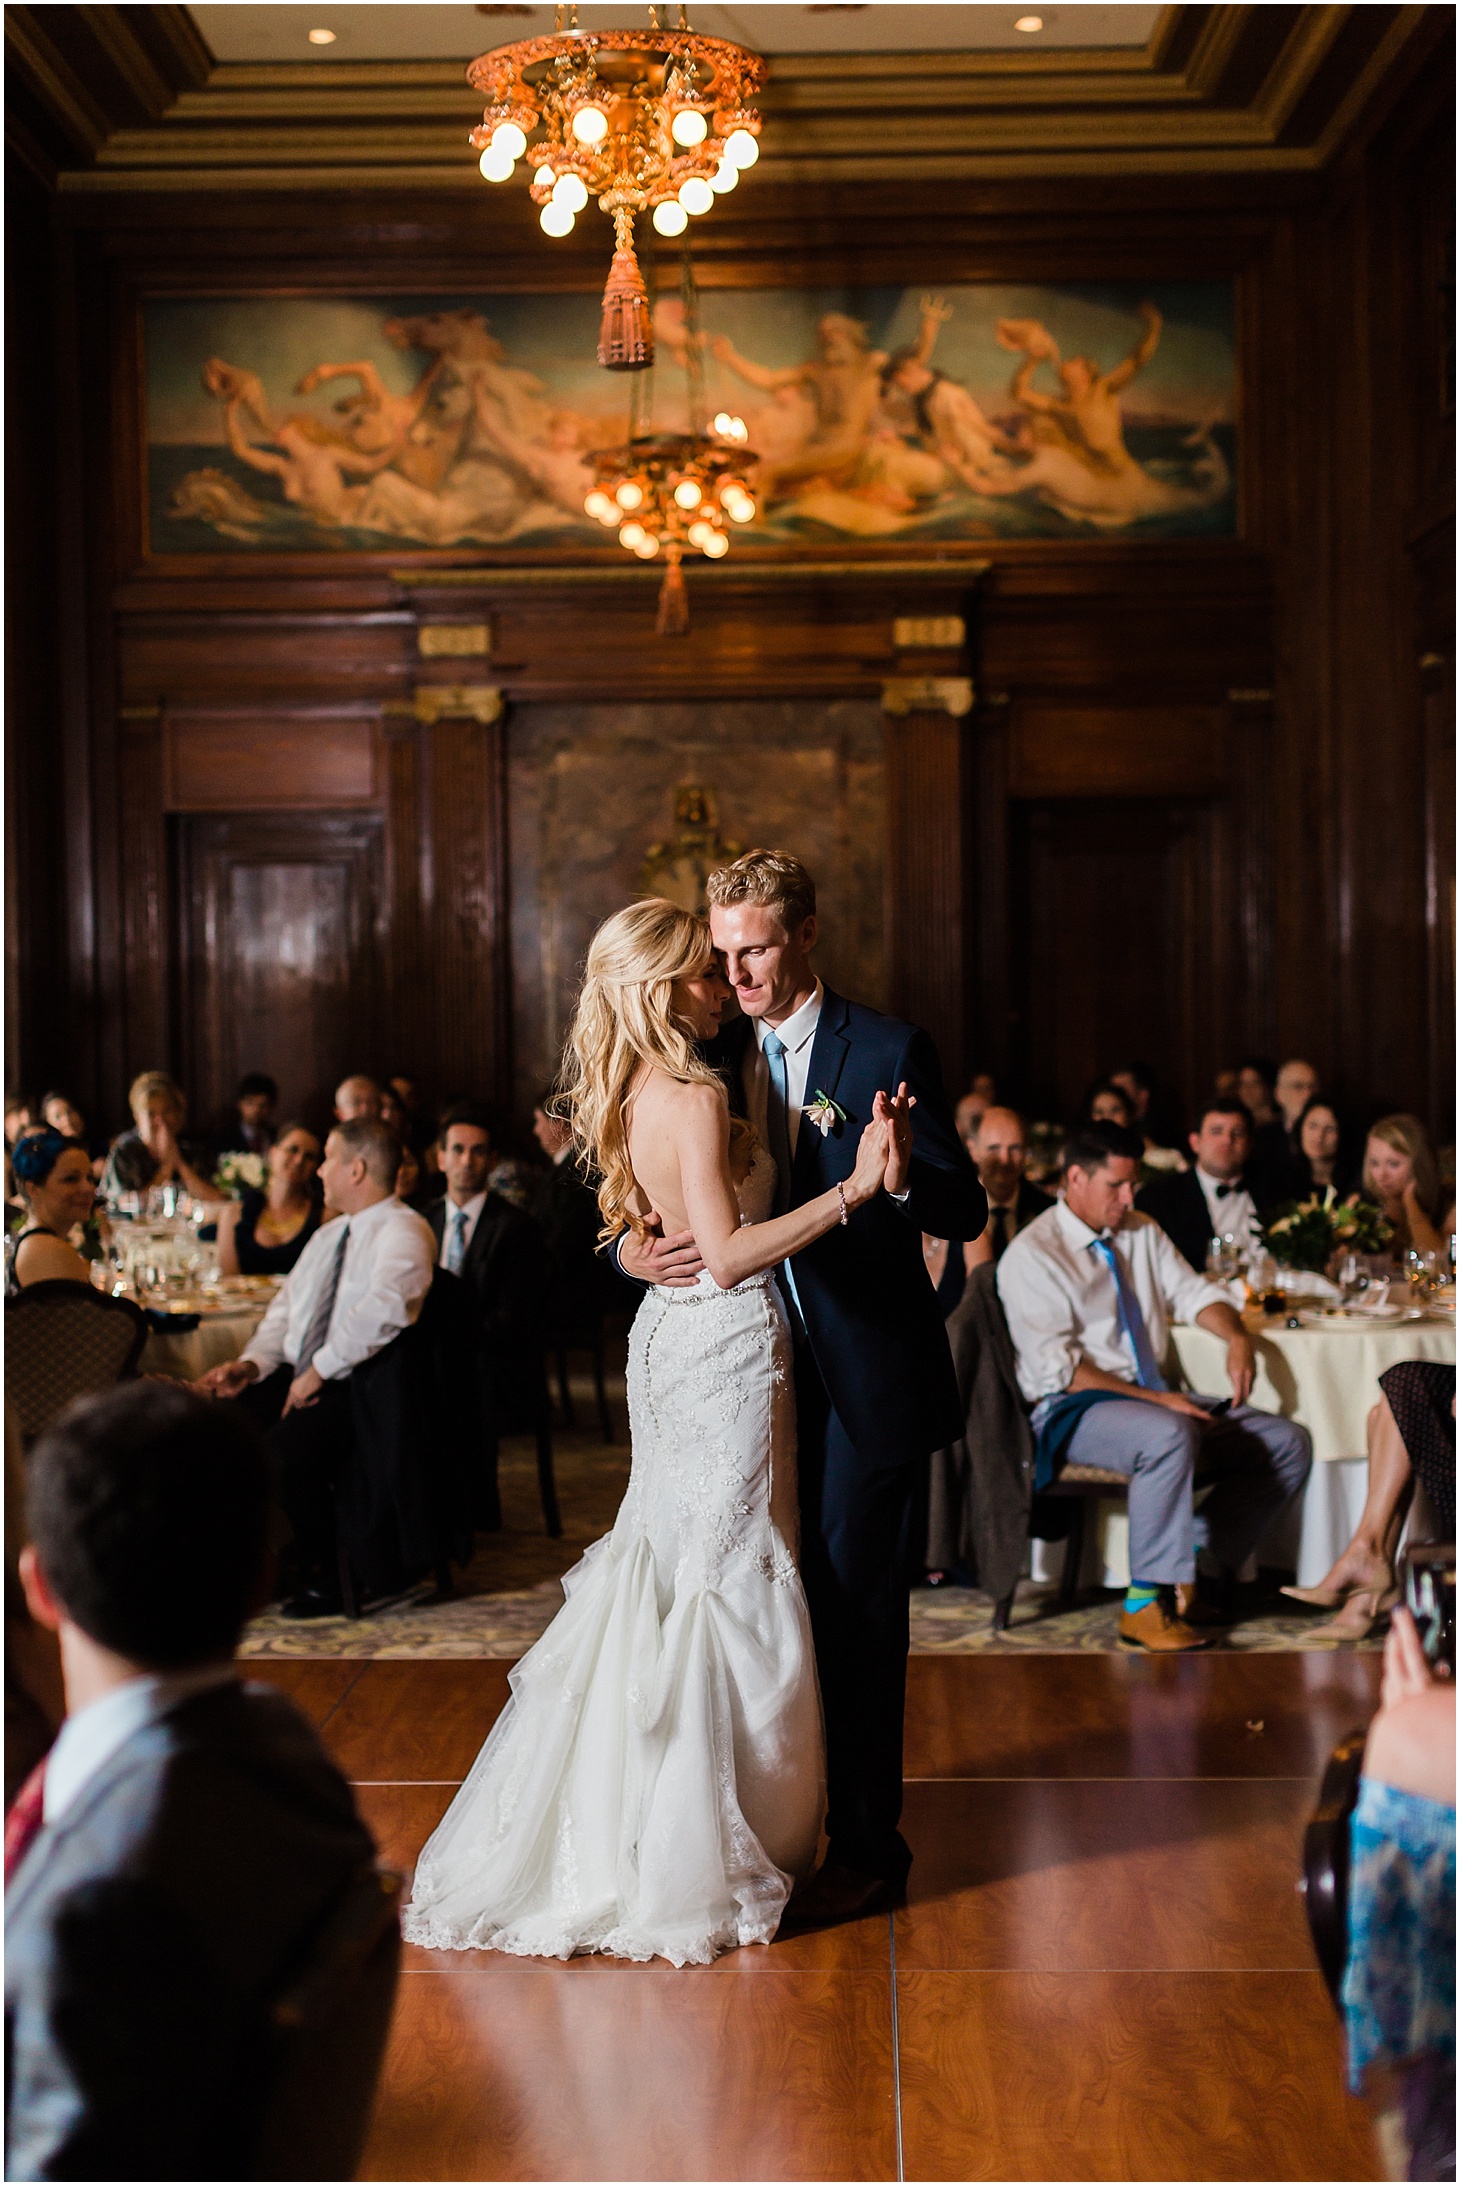 First Dance during Wedding Reception at Army and Navy Club in DC, Navy and Blush Summer Wedding at the Army and Navy Club, Ceremony at Capitol Hill Baptist Church, Sarah Bradshaw Photography, DC Wedding Photographer